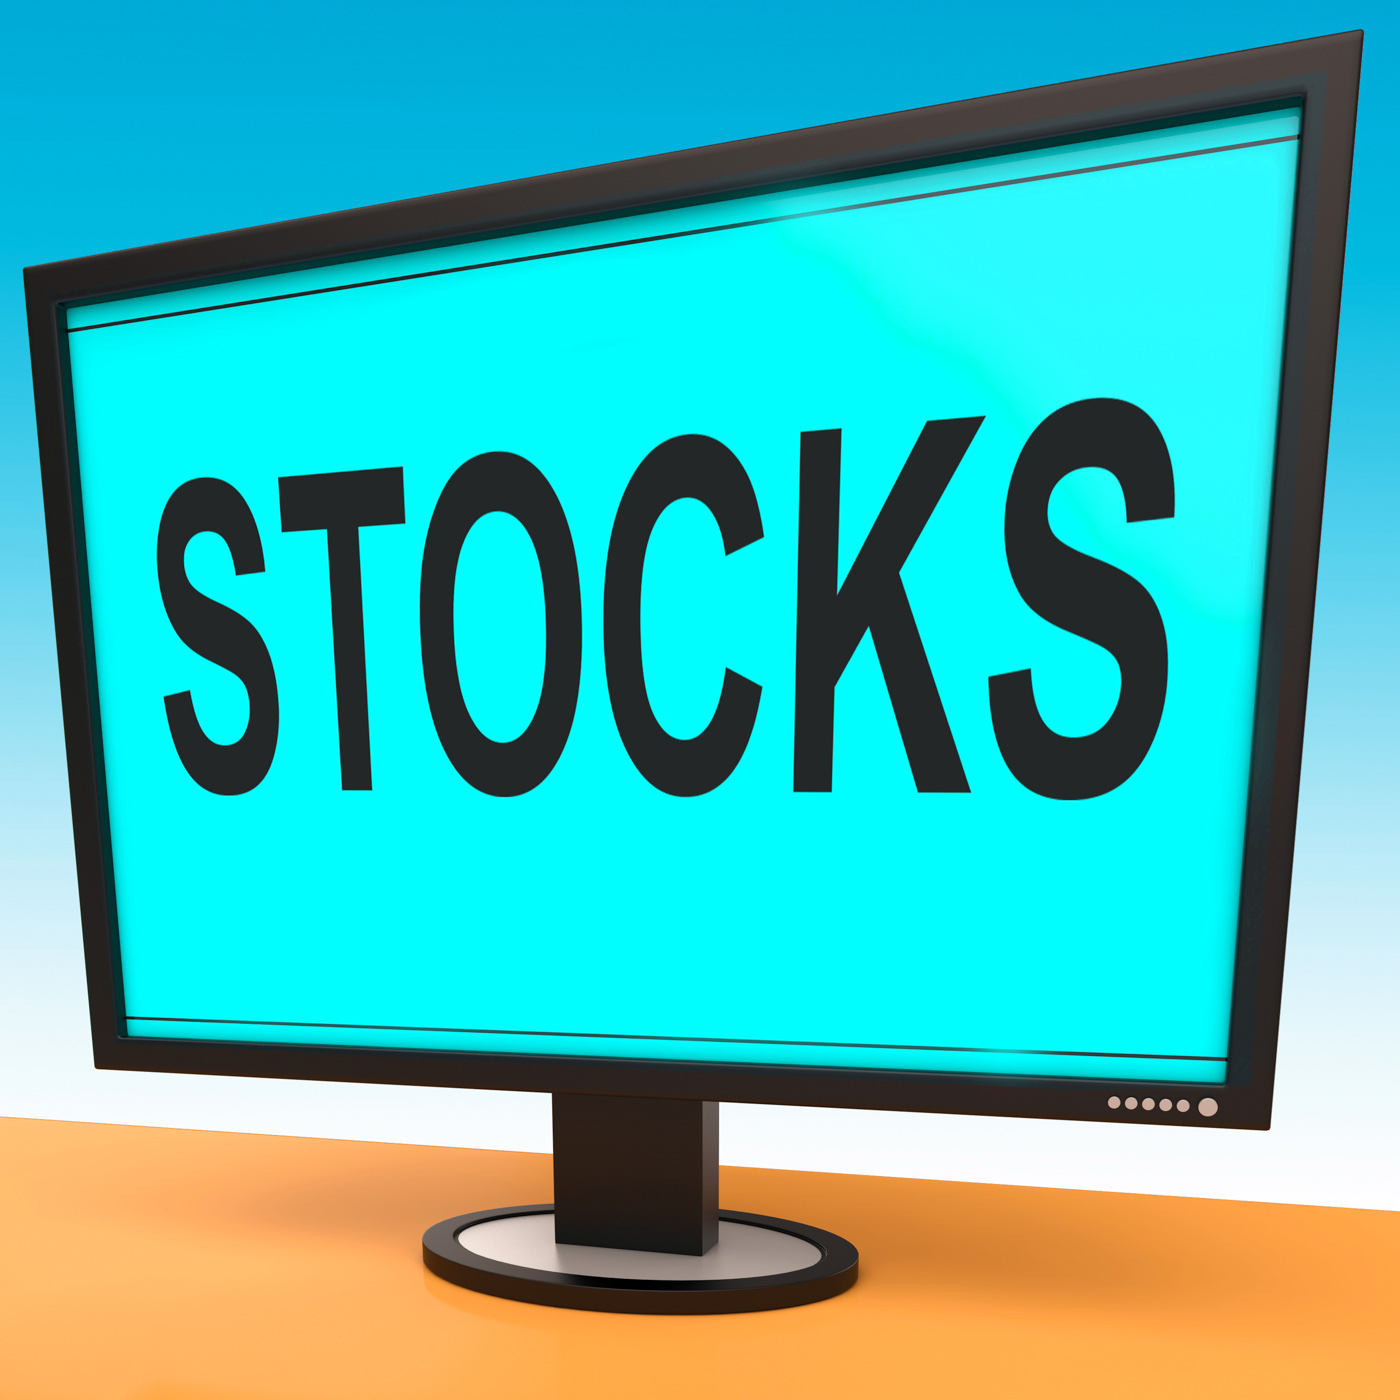 Stocks screen shows shares and stock market photo